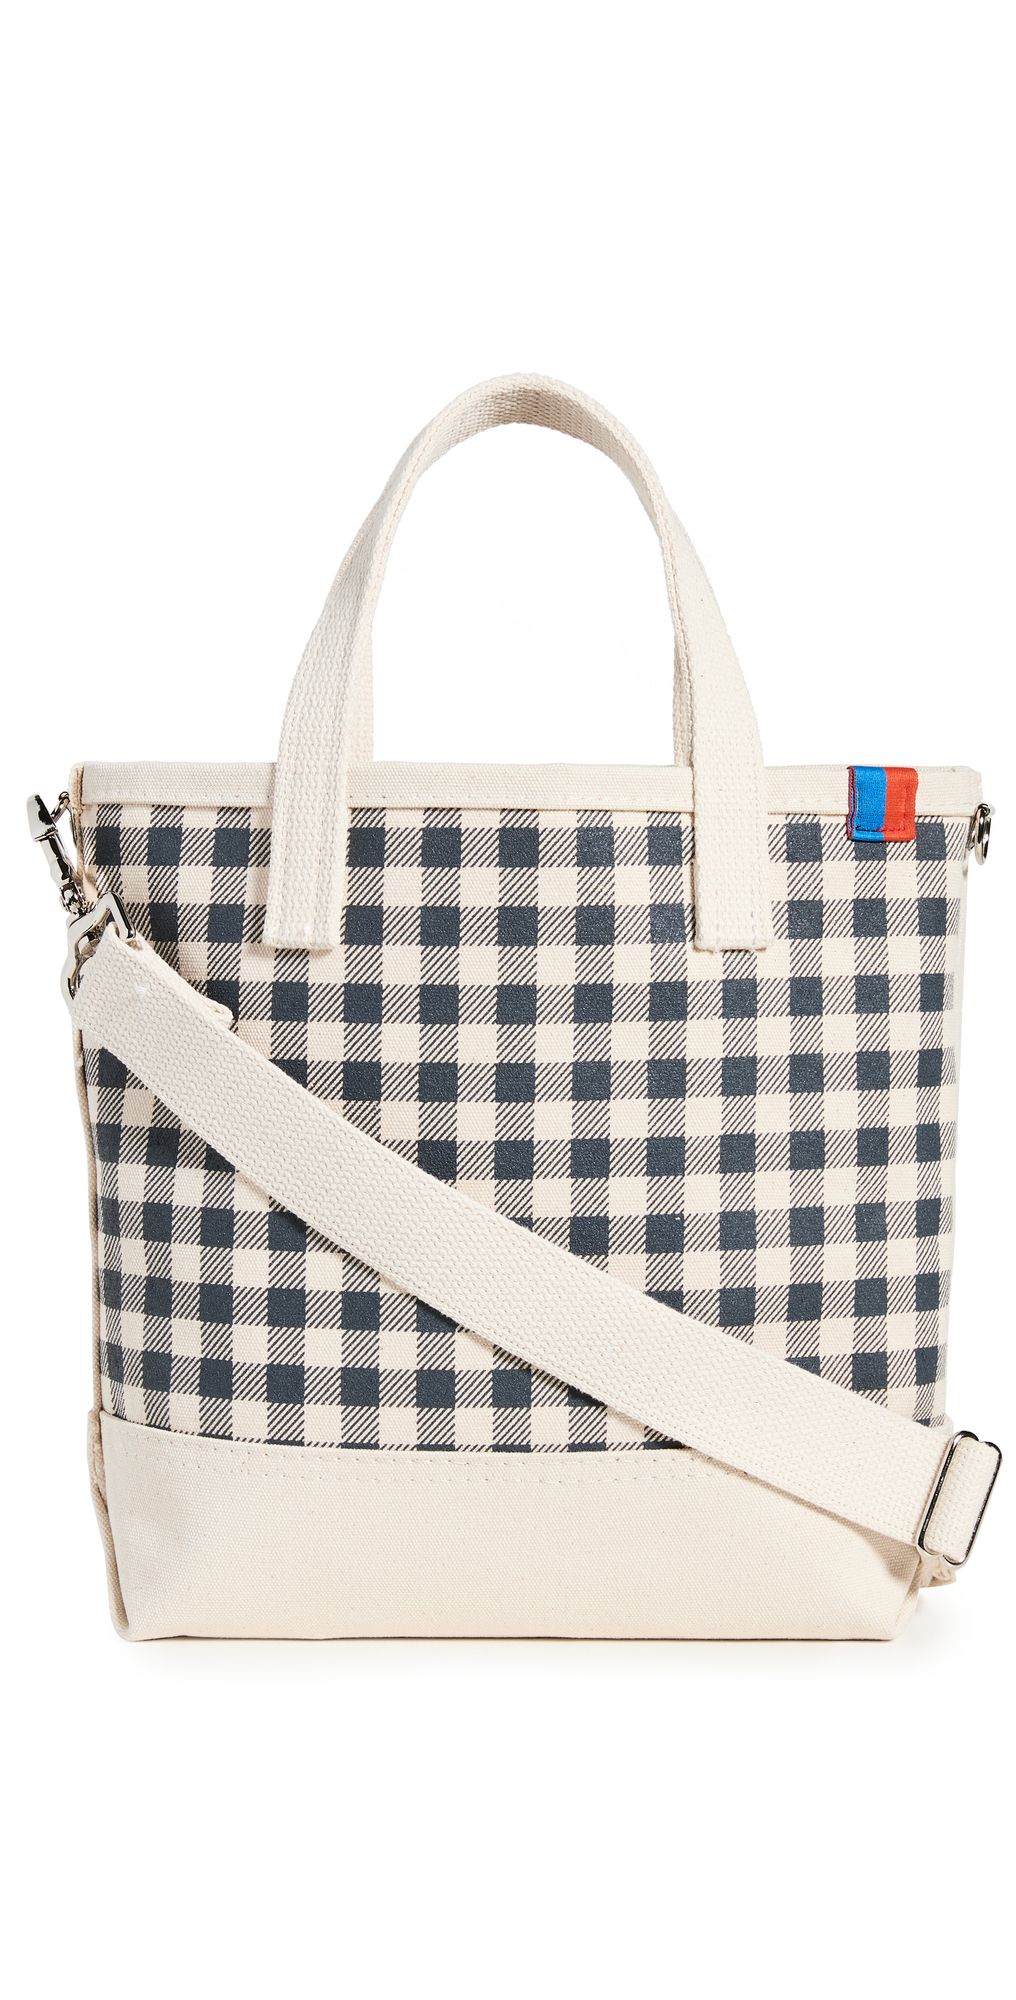 The All Over Gingham Bucket Tote | Shopbop